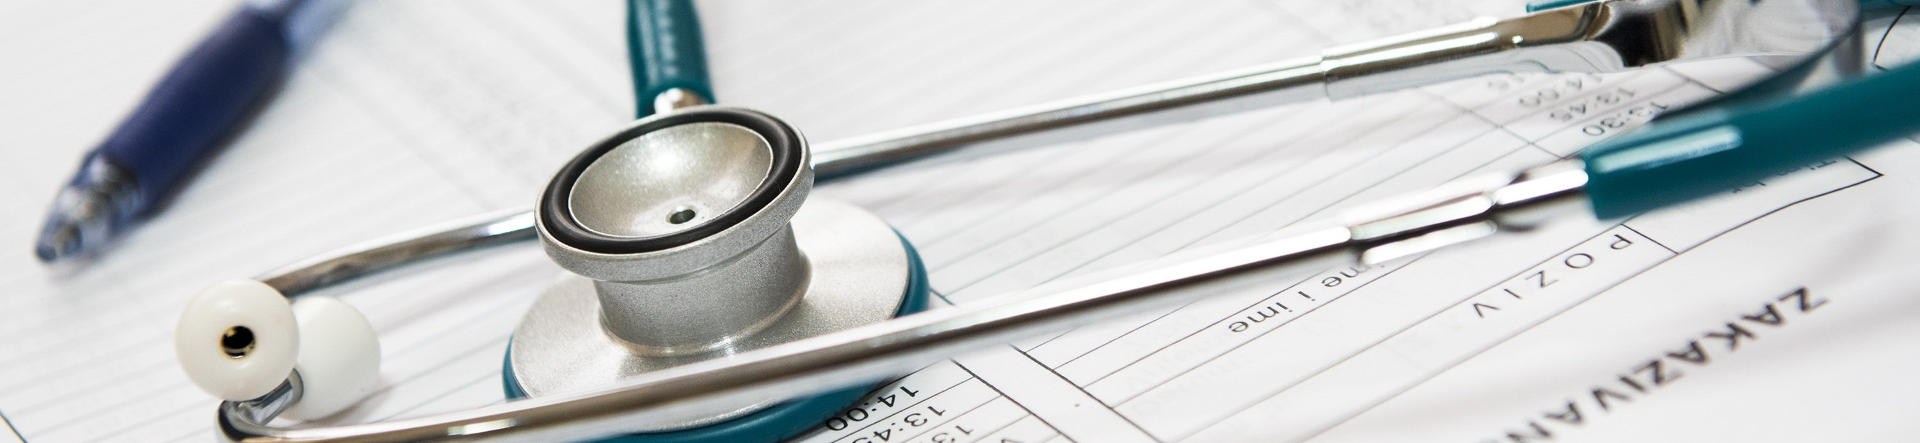 Banner picture of a stethoscope lying on top of a form with a pen sitting next to it.